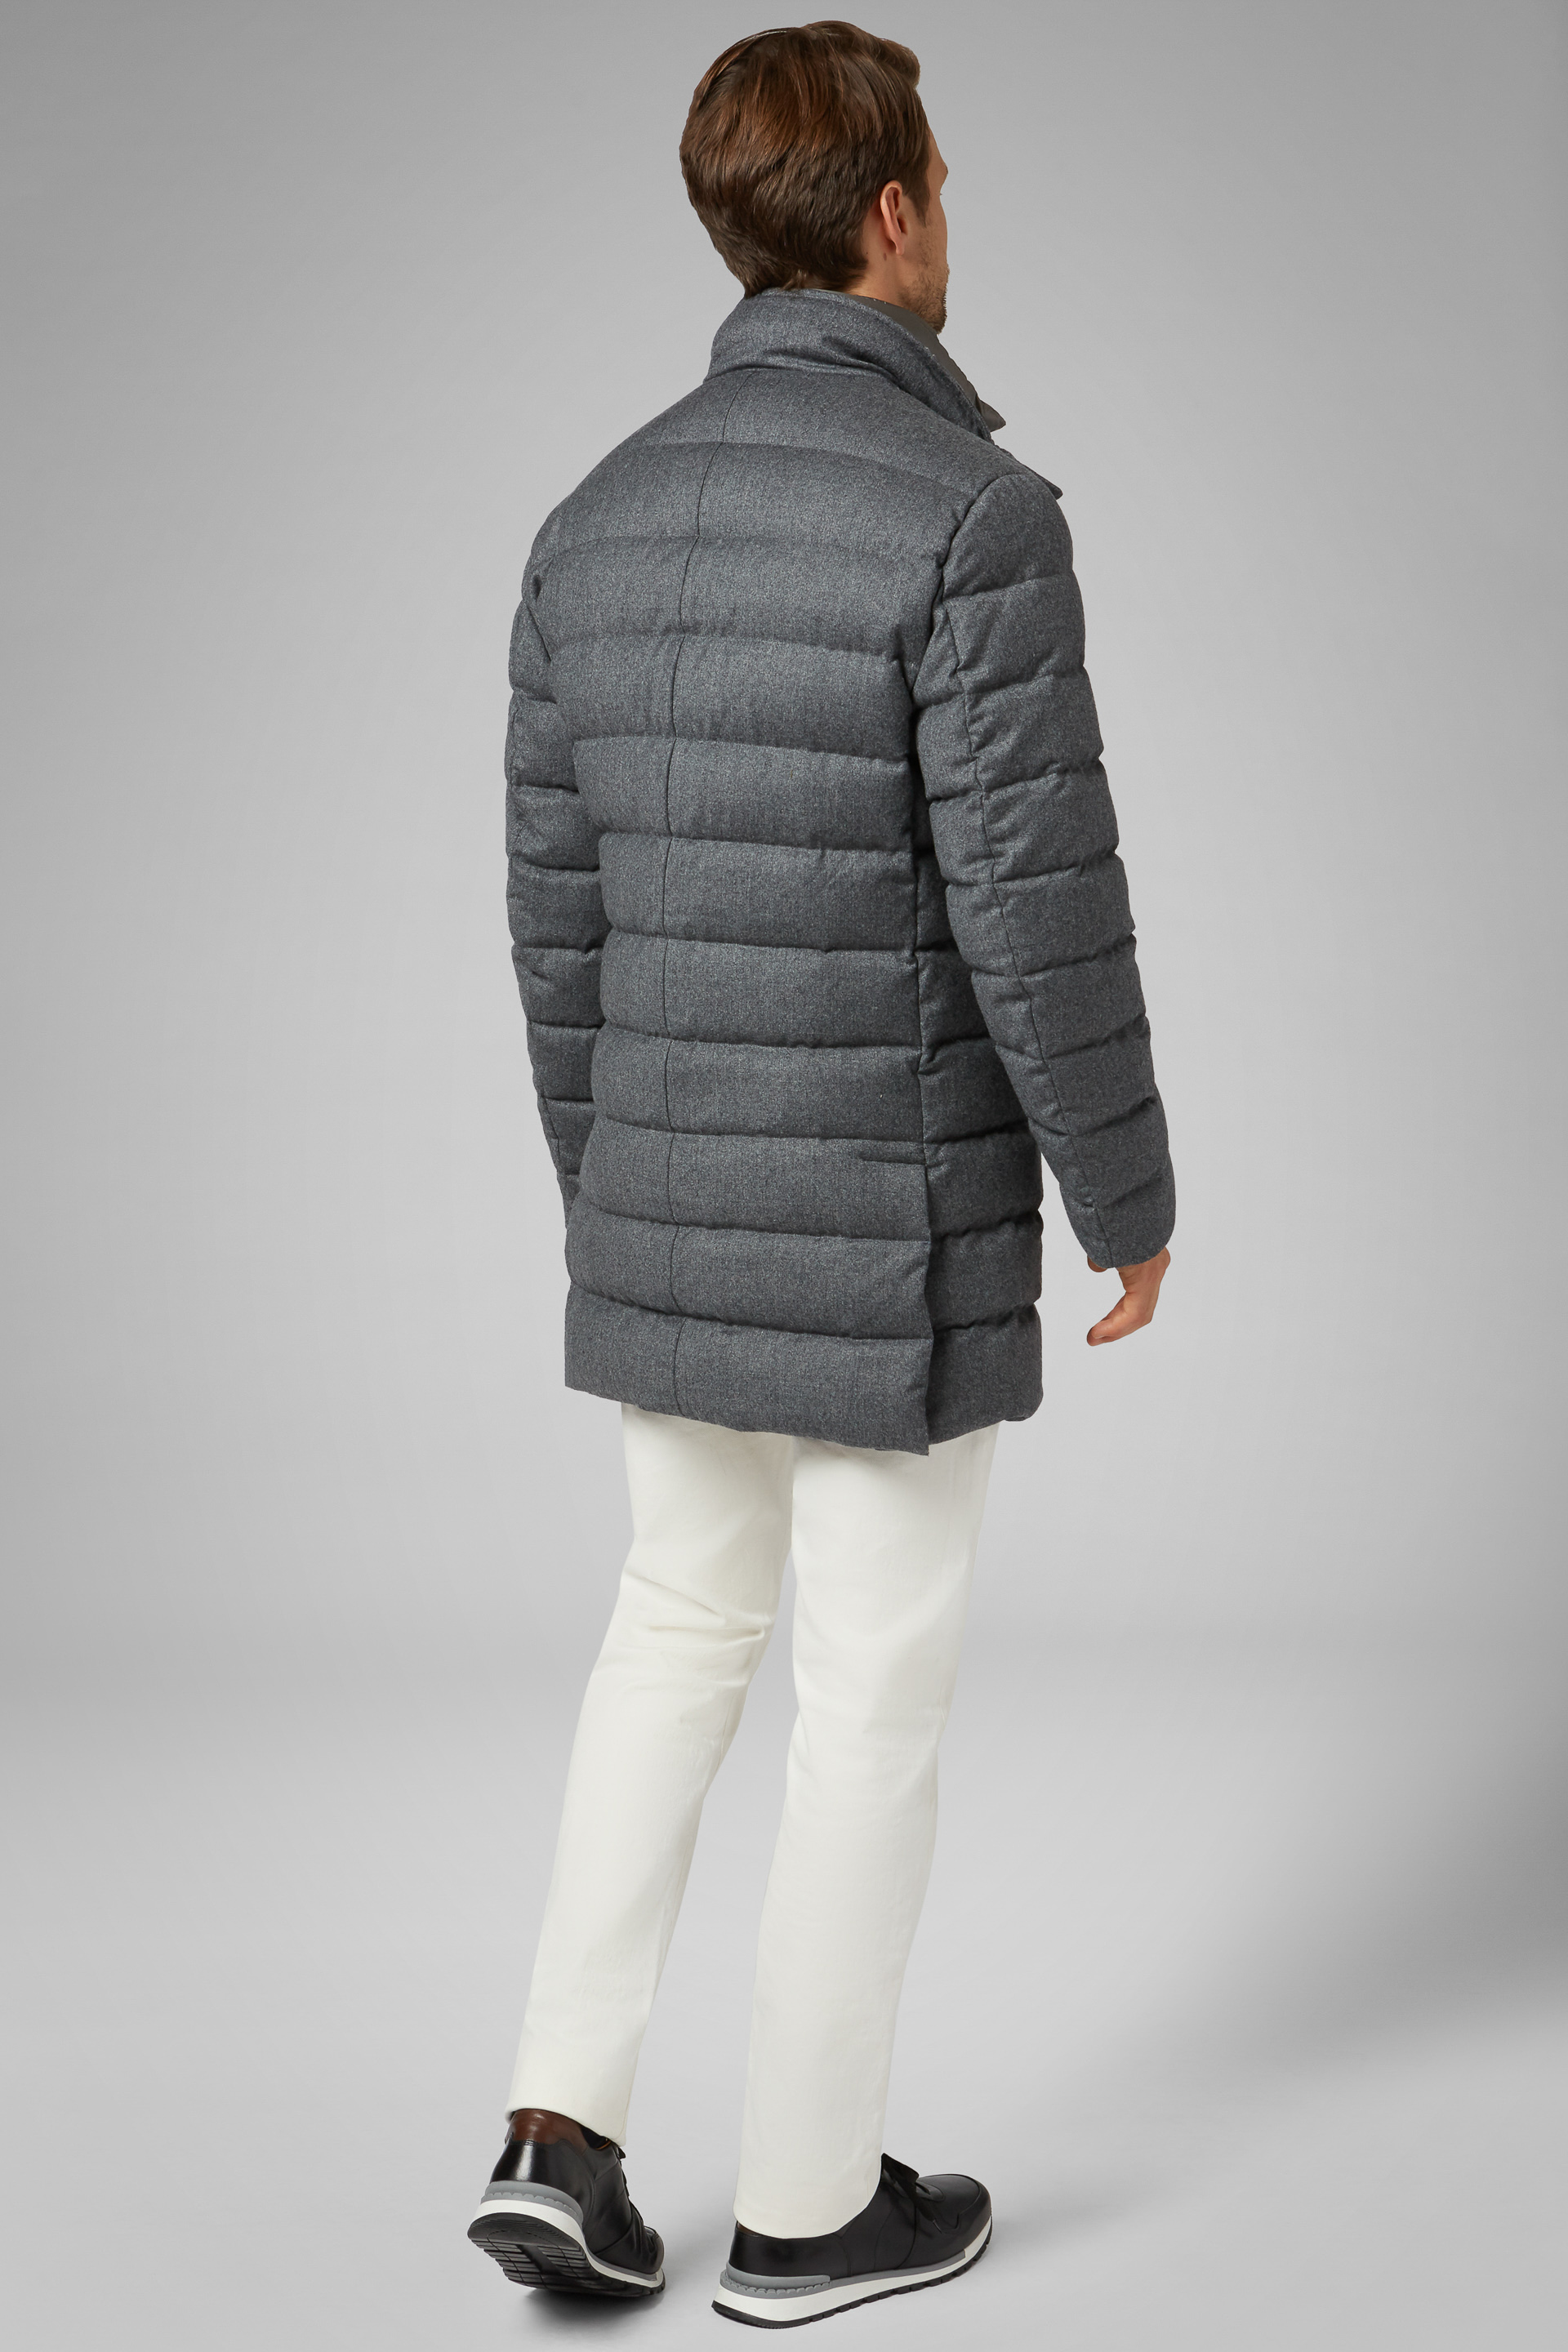 Men's Quilted Wool Coat With Bib